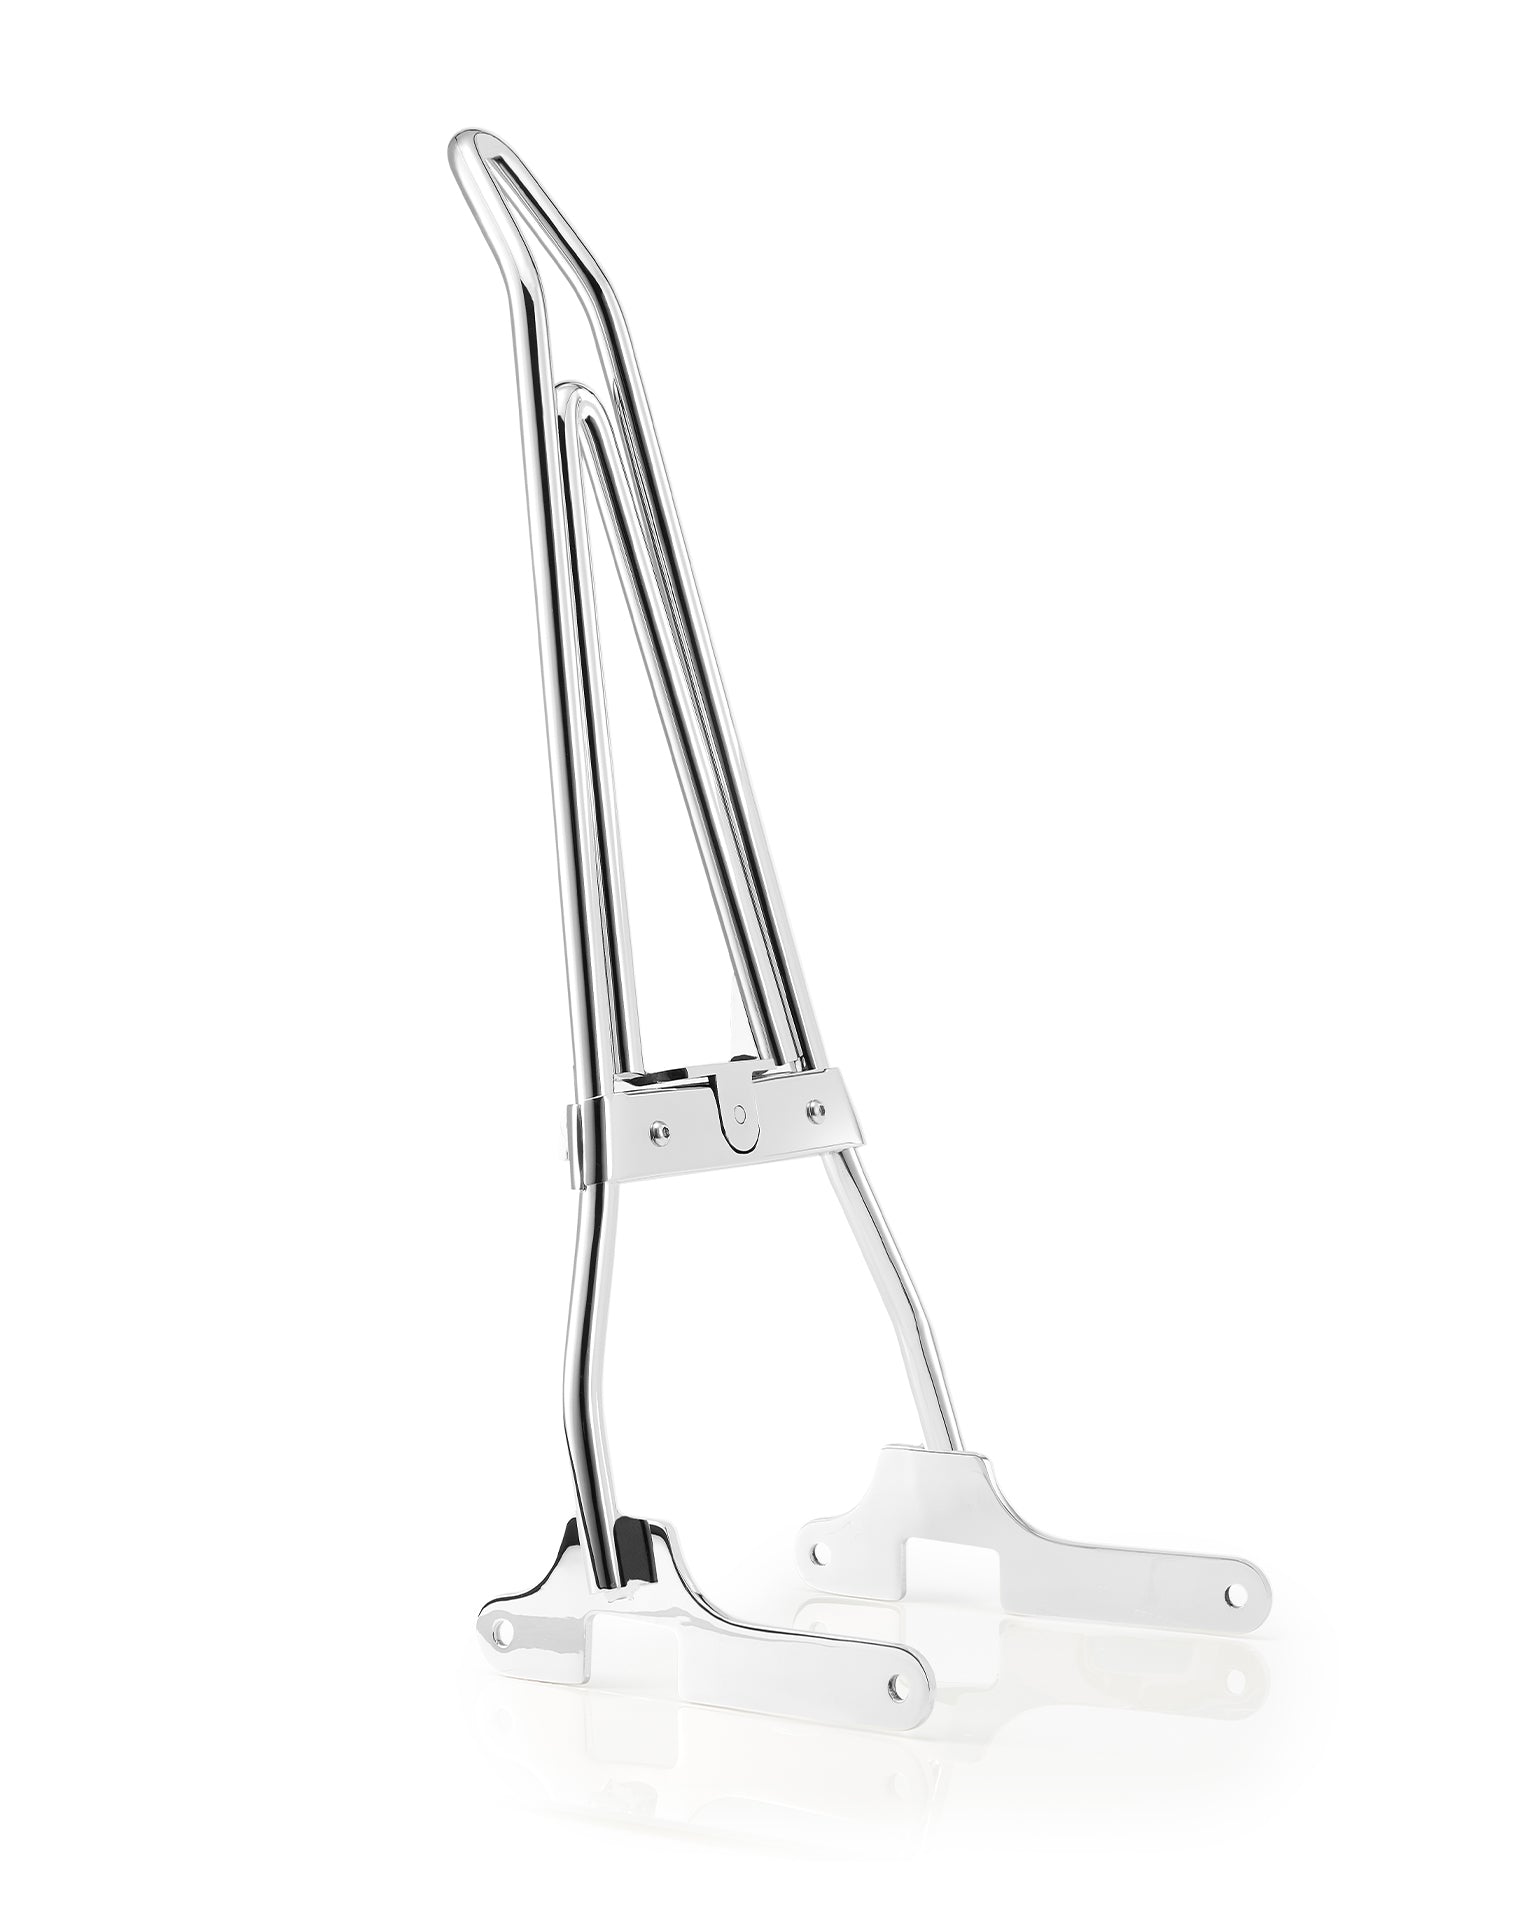 Iron Born Blade 25" Sissy Bar with Foldable Luggage Rack for Harley Sportster 883 Custom XL883C Chrome Main view